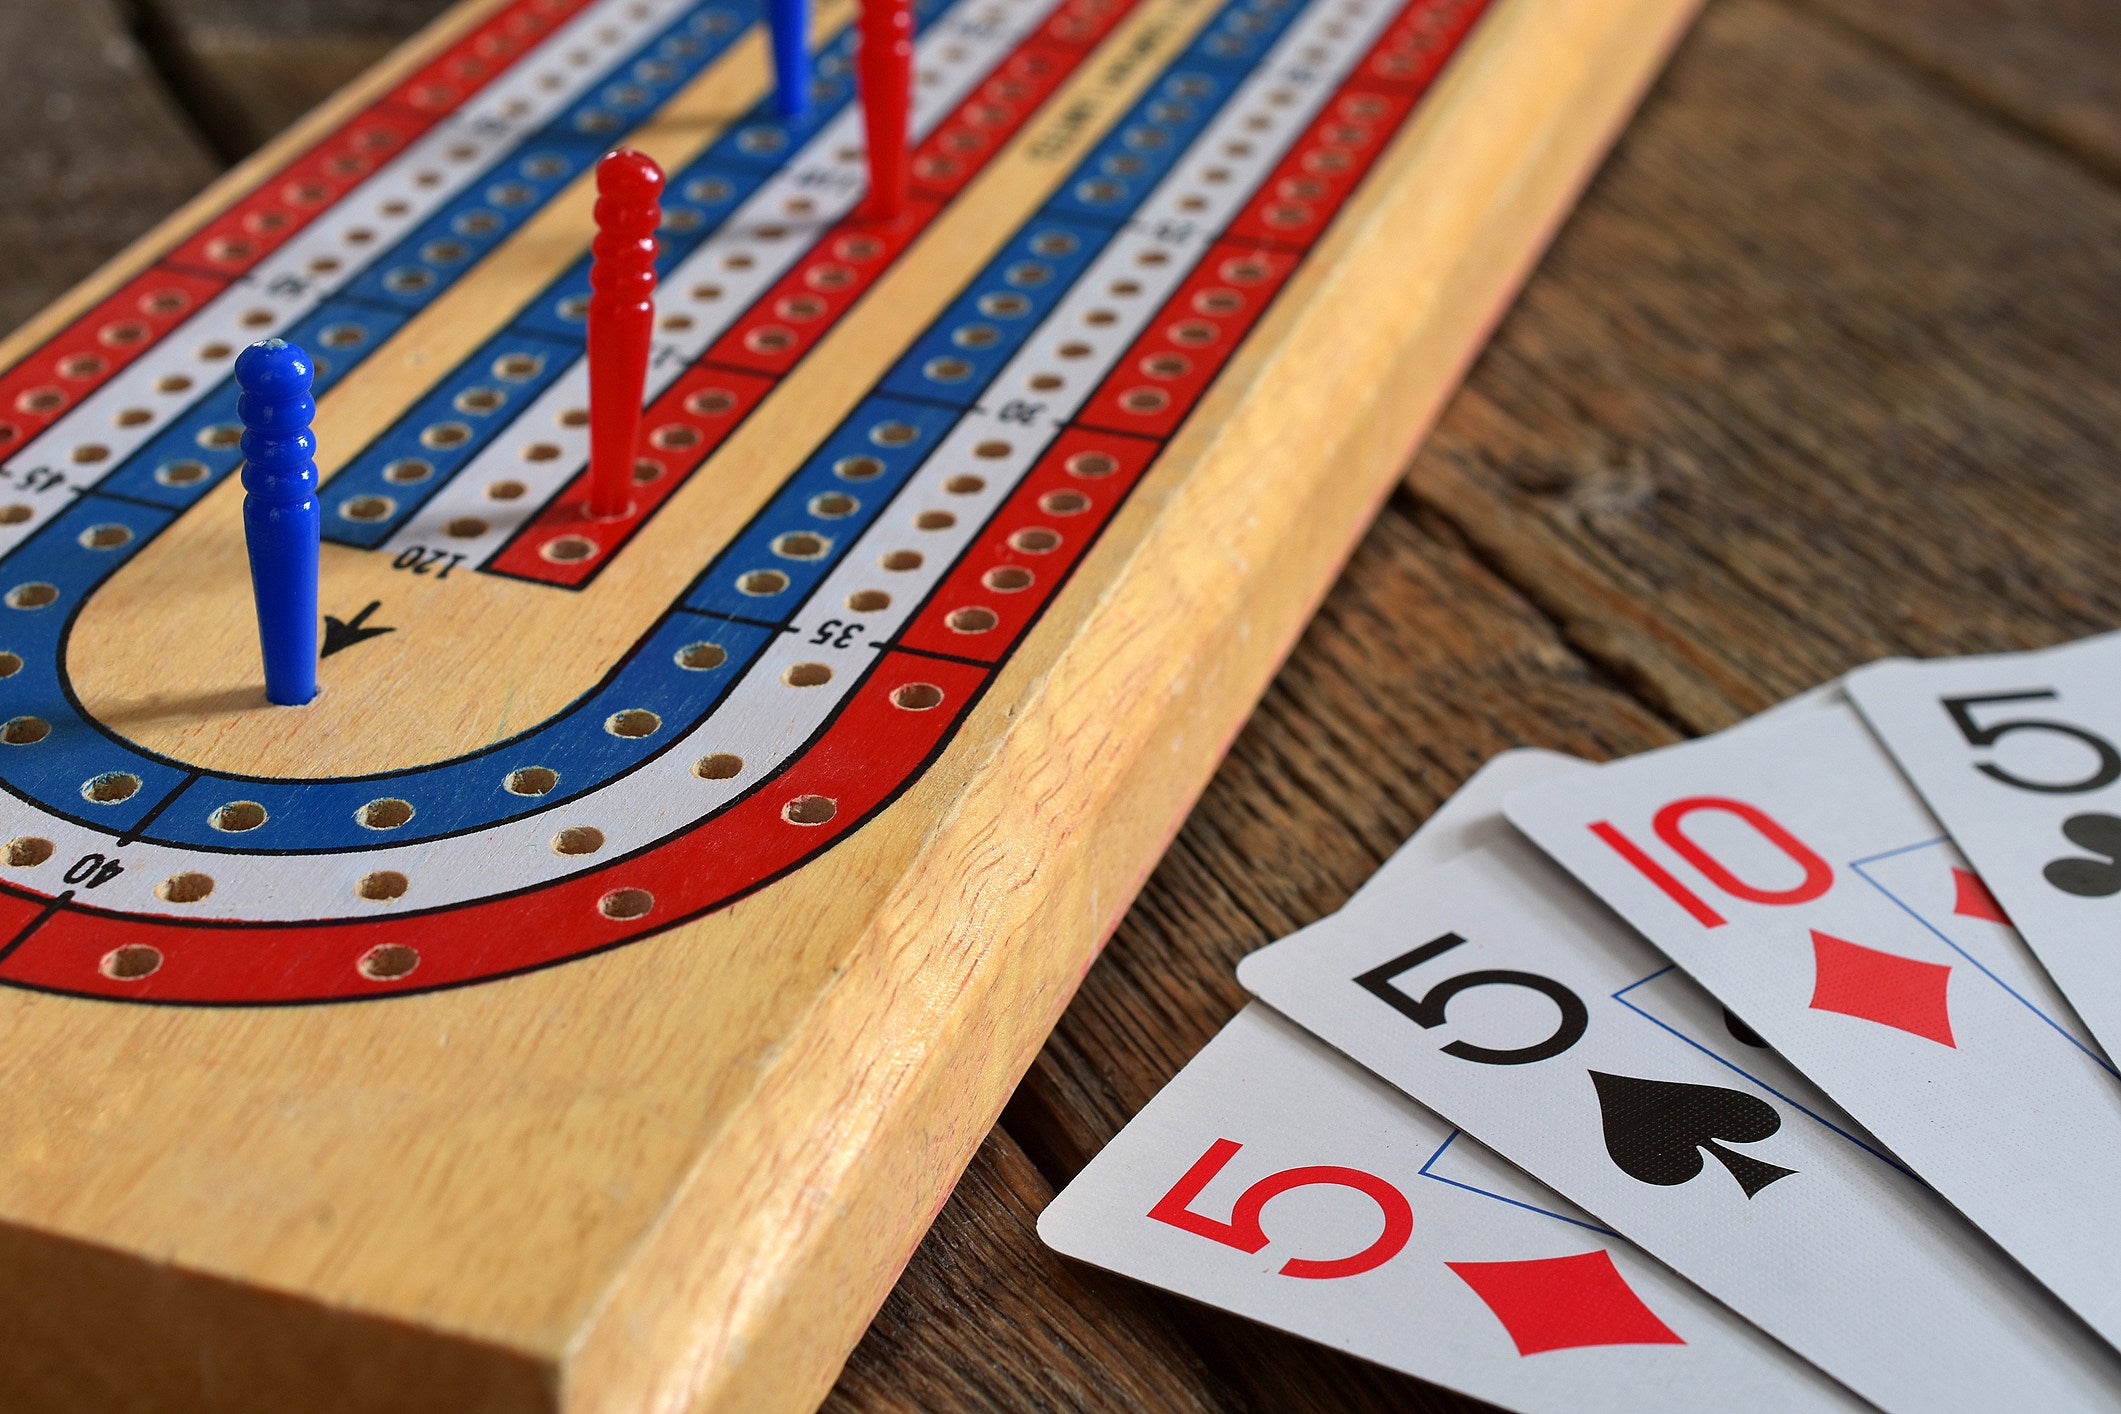 How to Play 3 Player Cribbage - Cribbage - Play online now